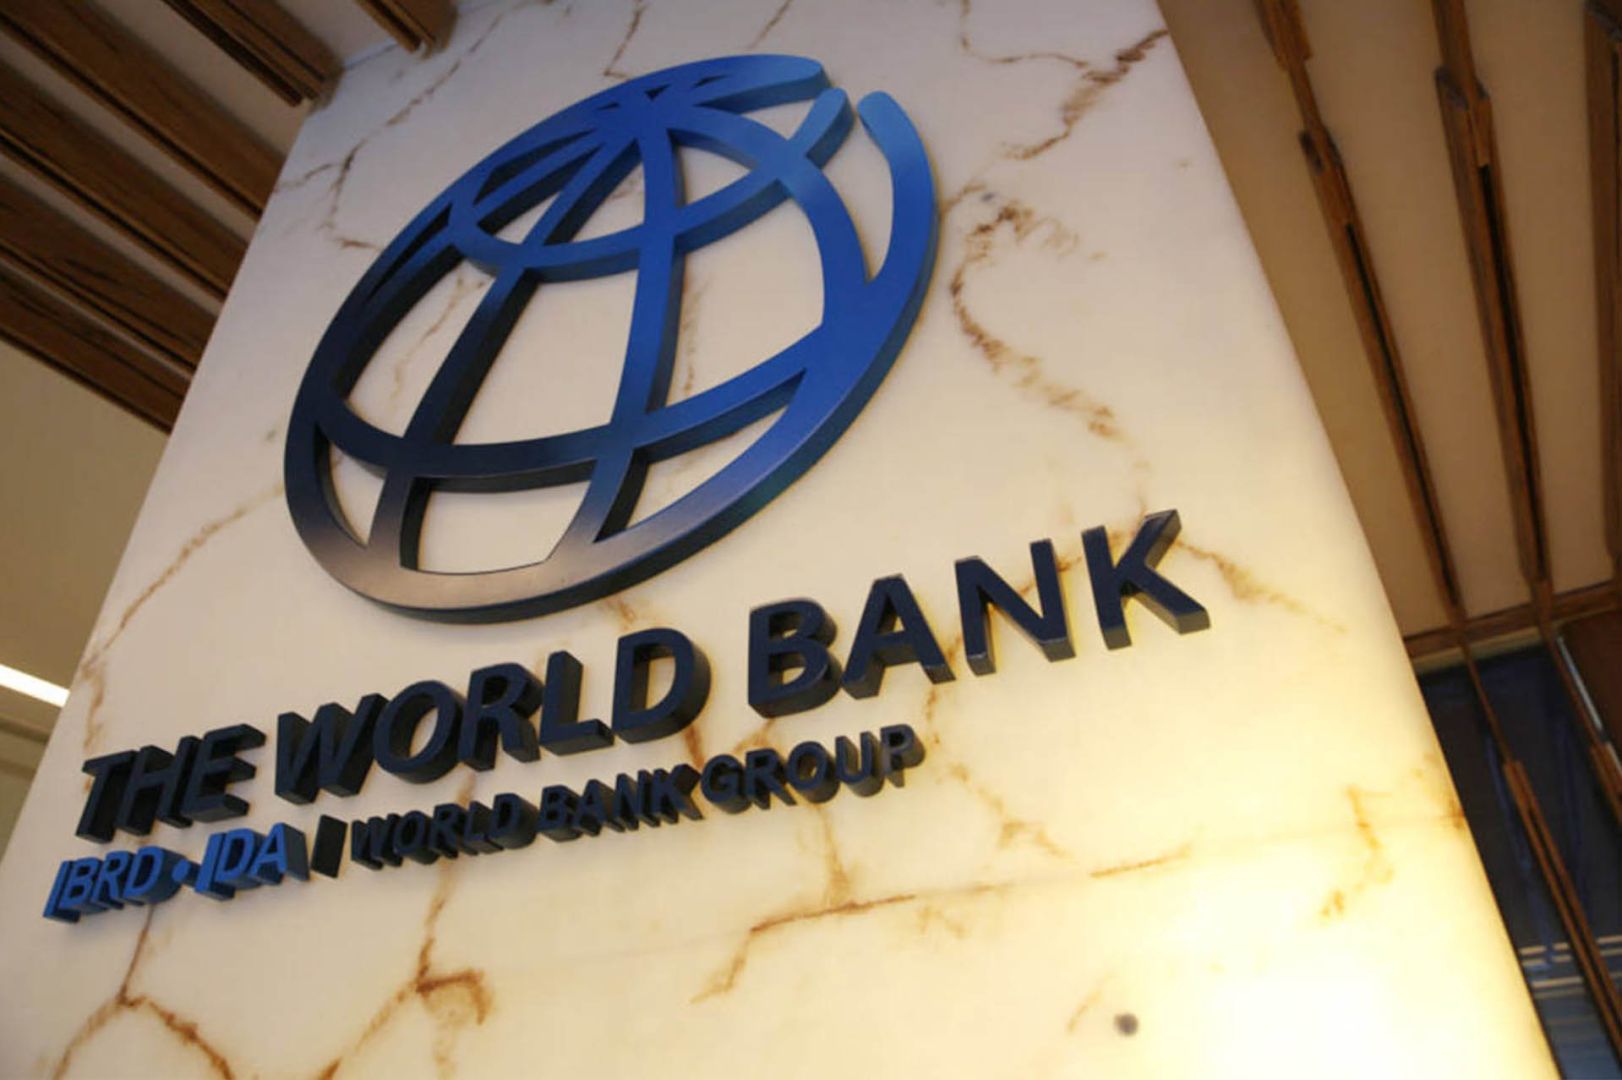 World Bank provides technical assistance for women to work in previously prohibited areas